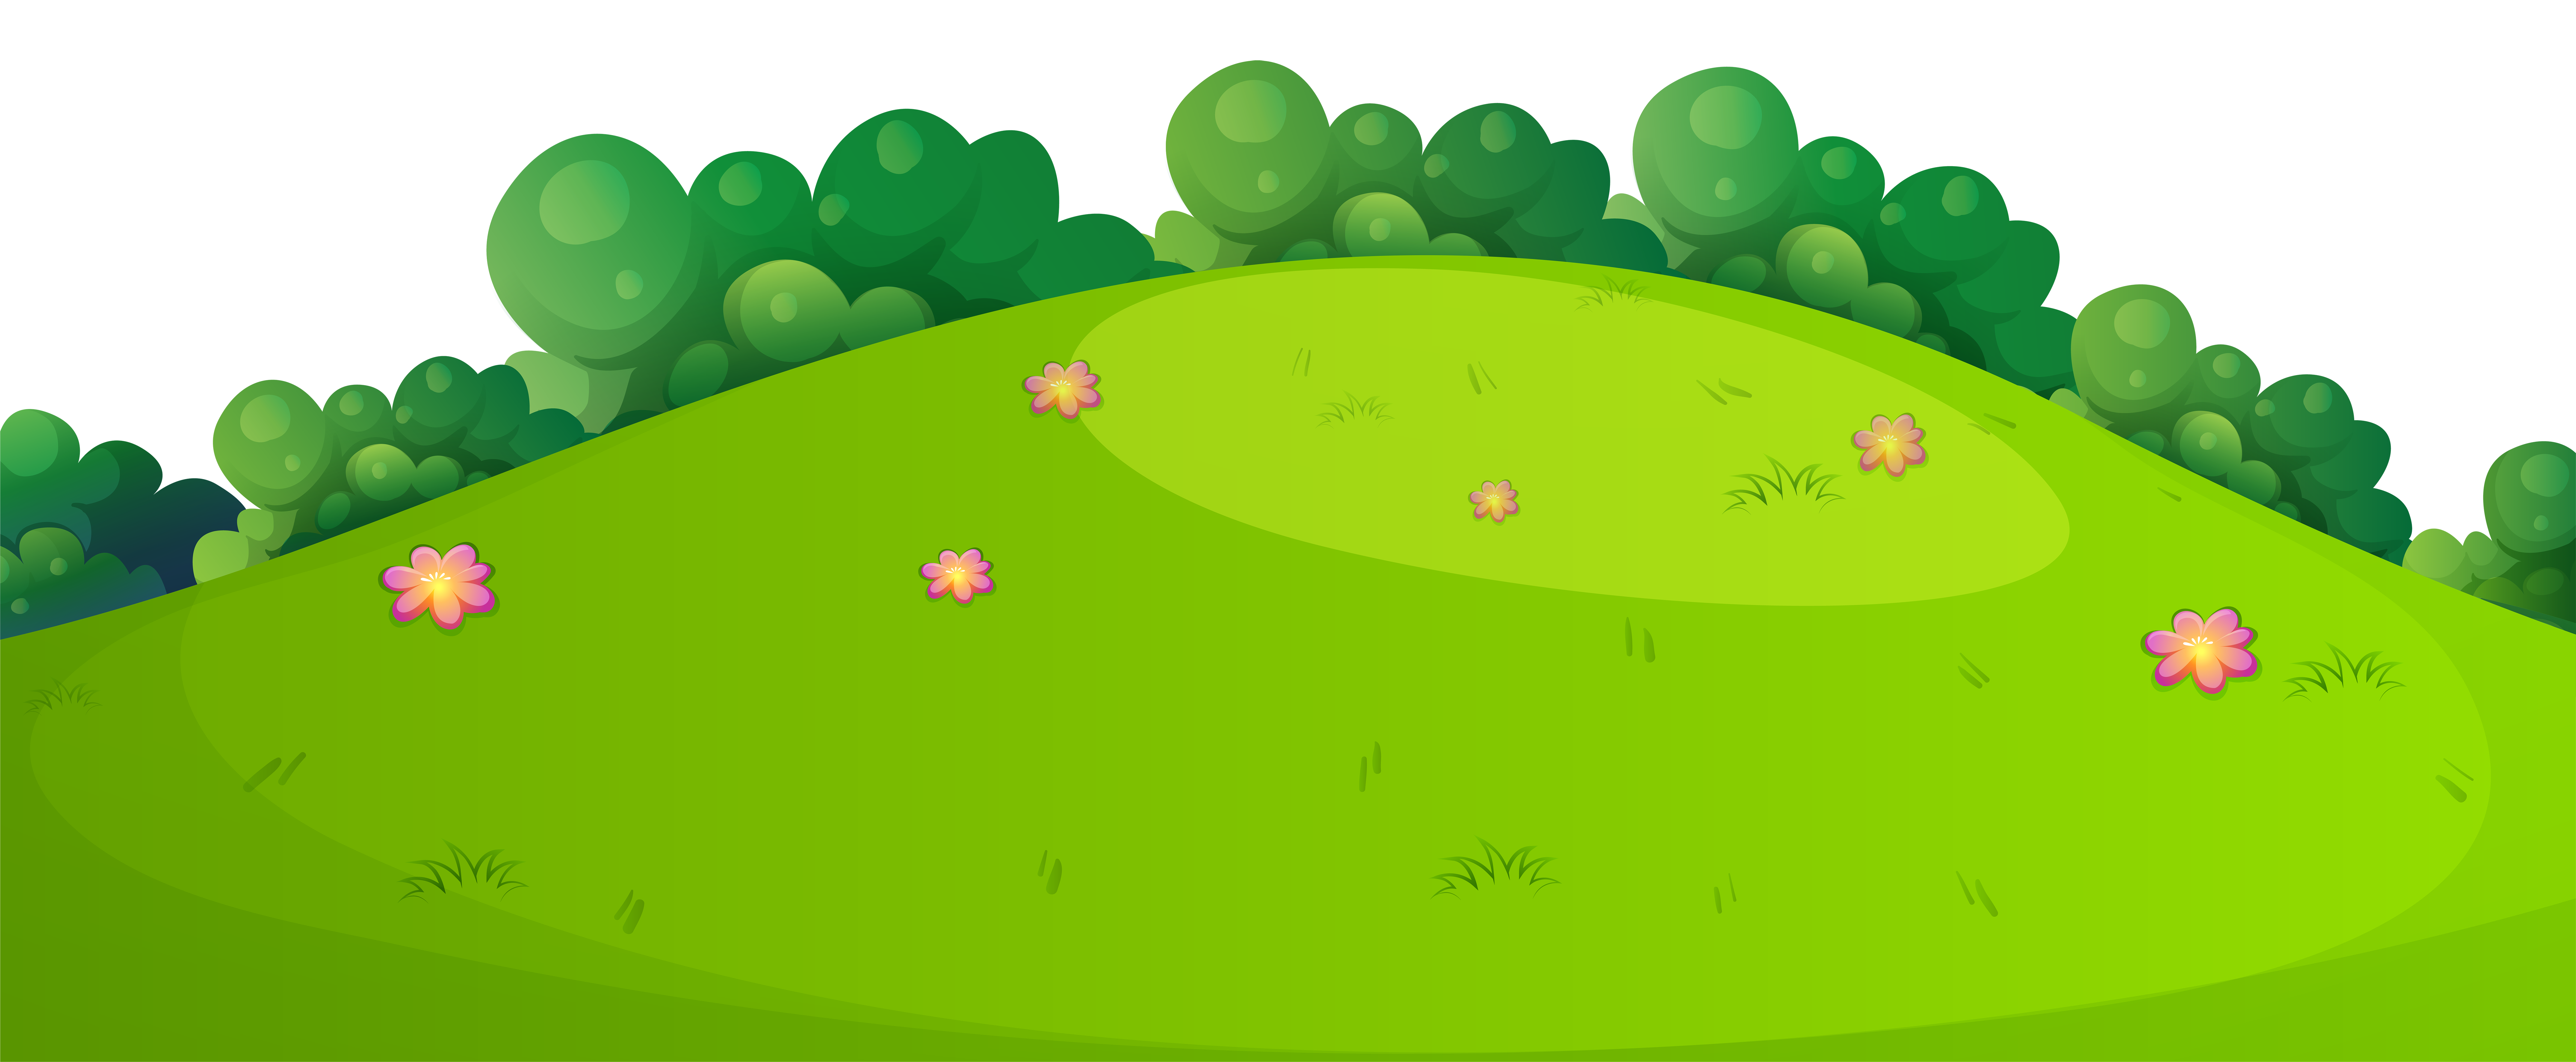 flower meadow clipart - photo #29